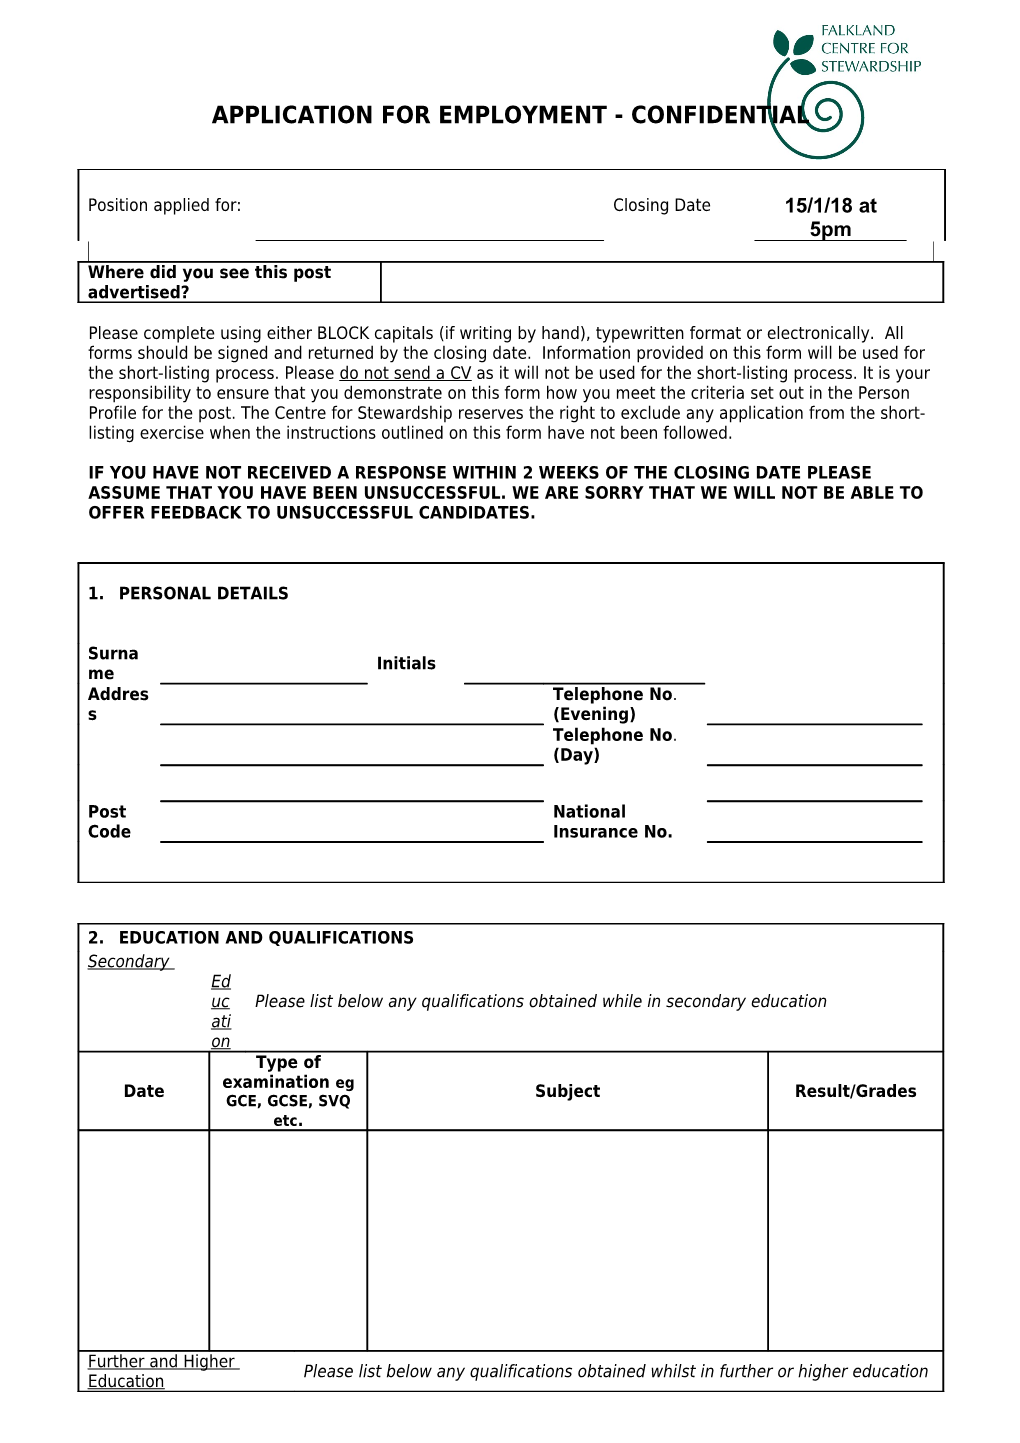 Application for Employment - Confidential